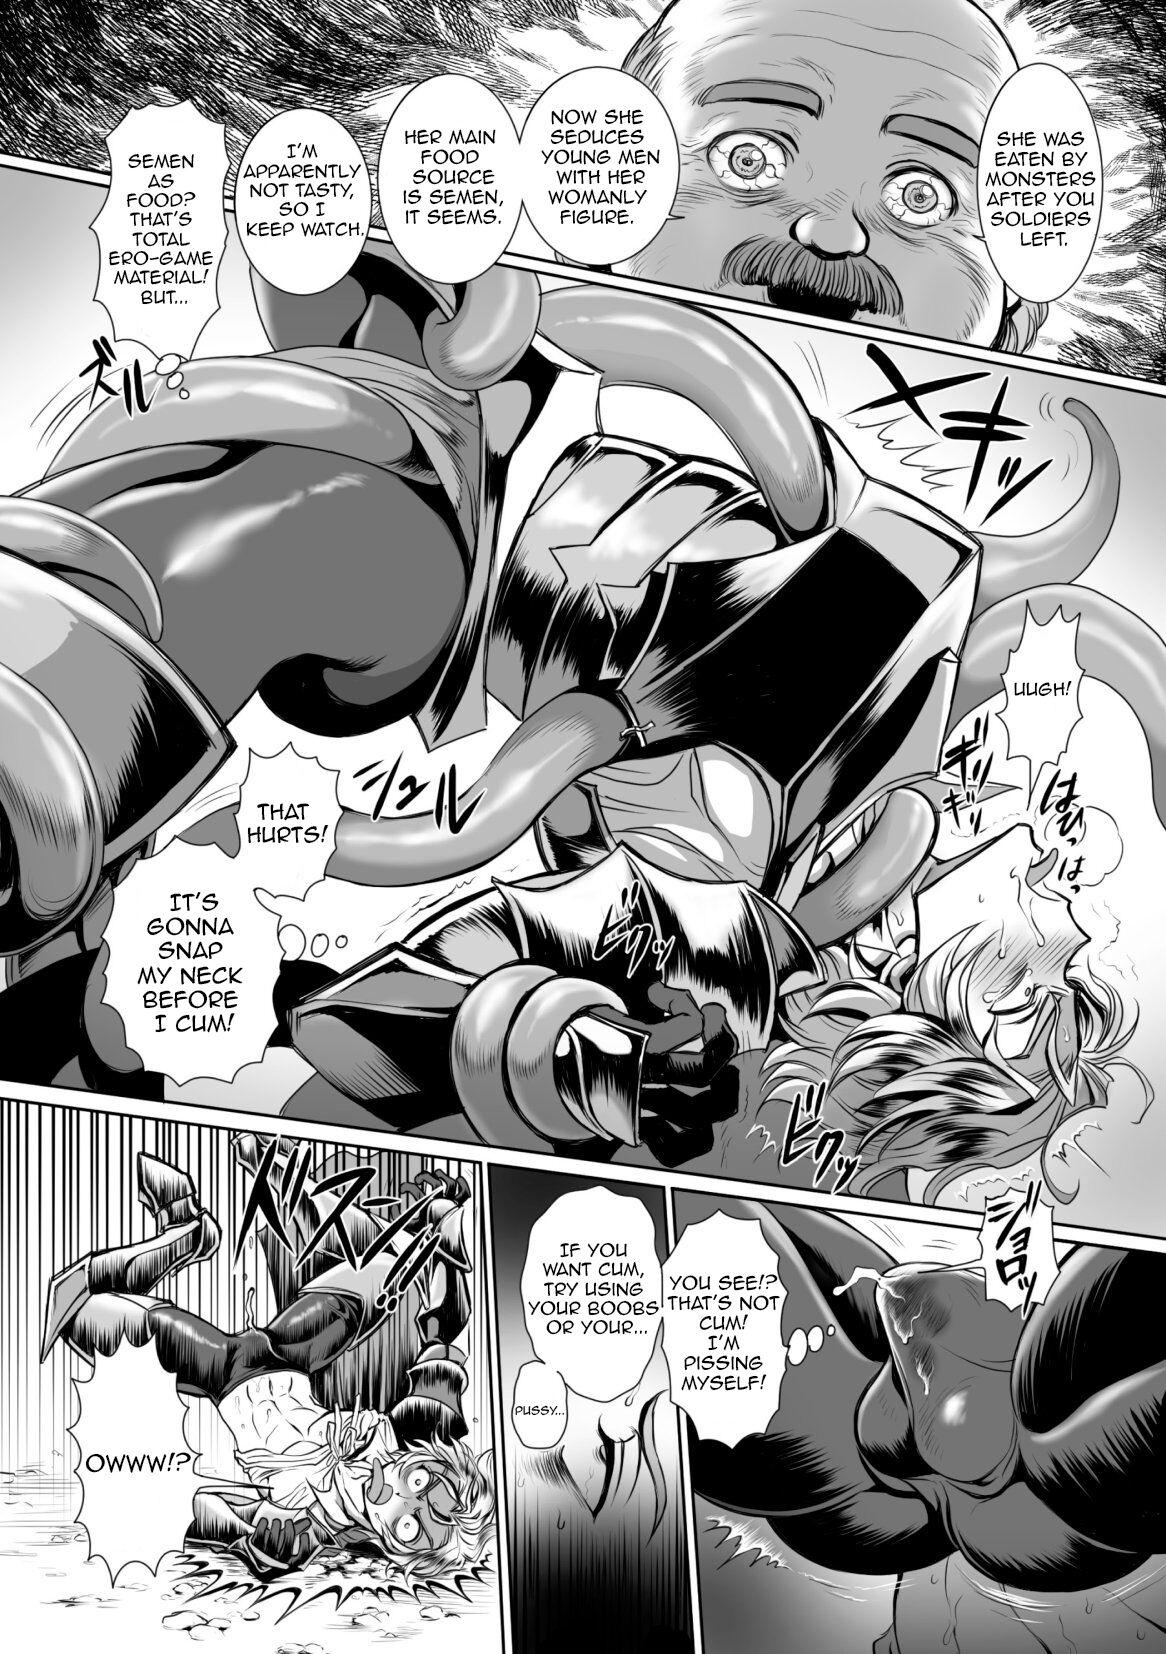 Possessed Knight Stallion: Forced to Climax by a Creeper! Ch. 2 11